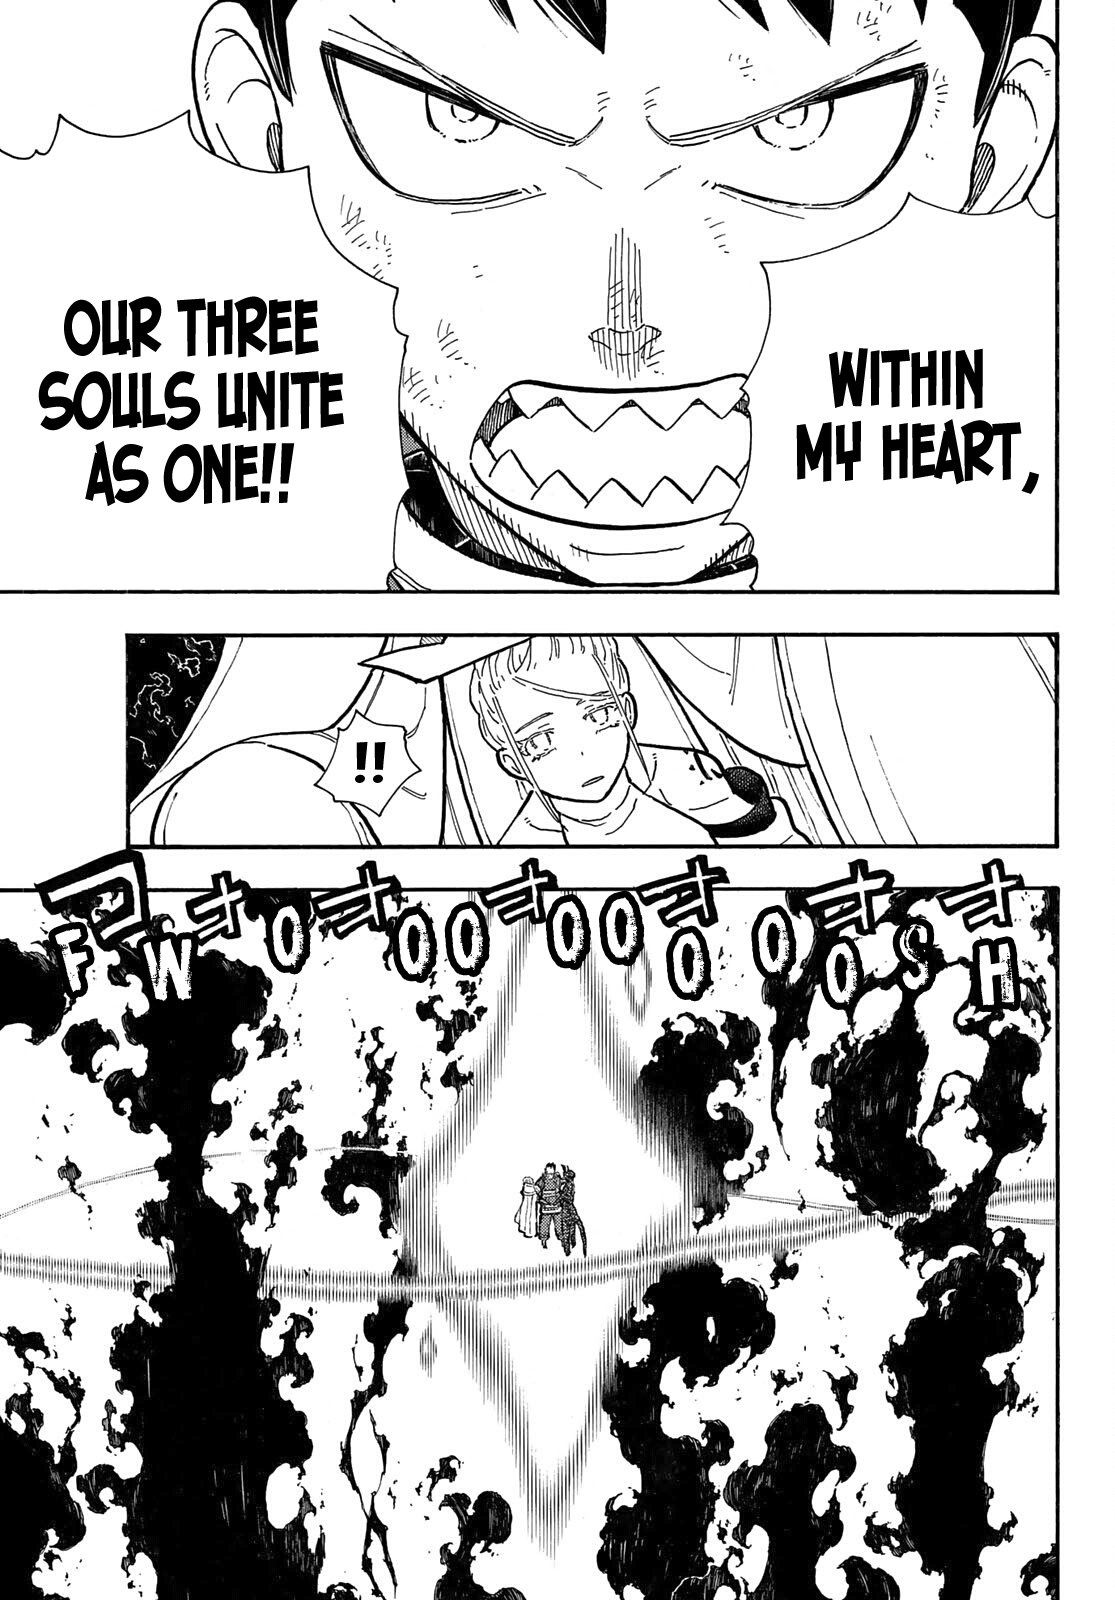 Soul Resonance Ability Confirmed in Fire Force?! : r/souleater